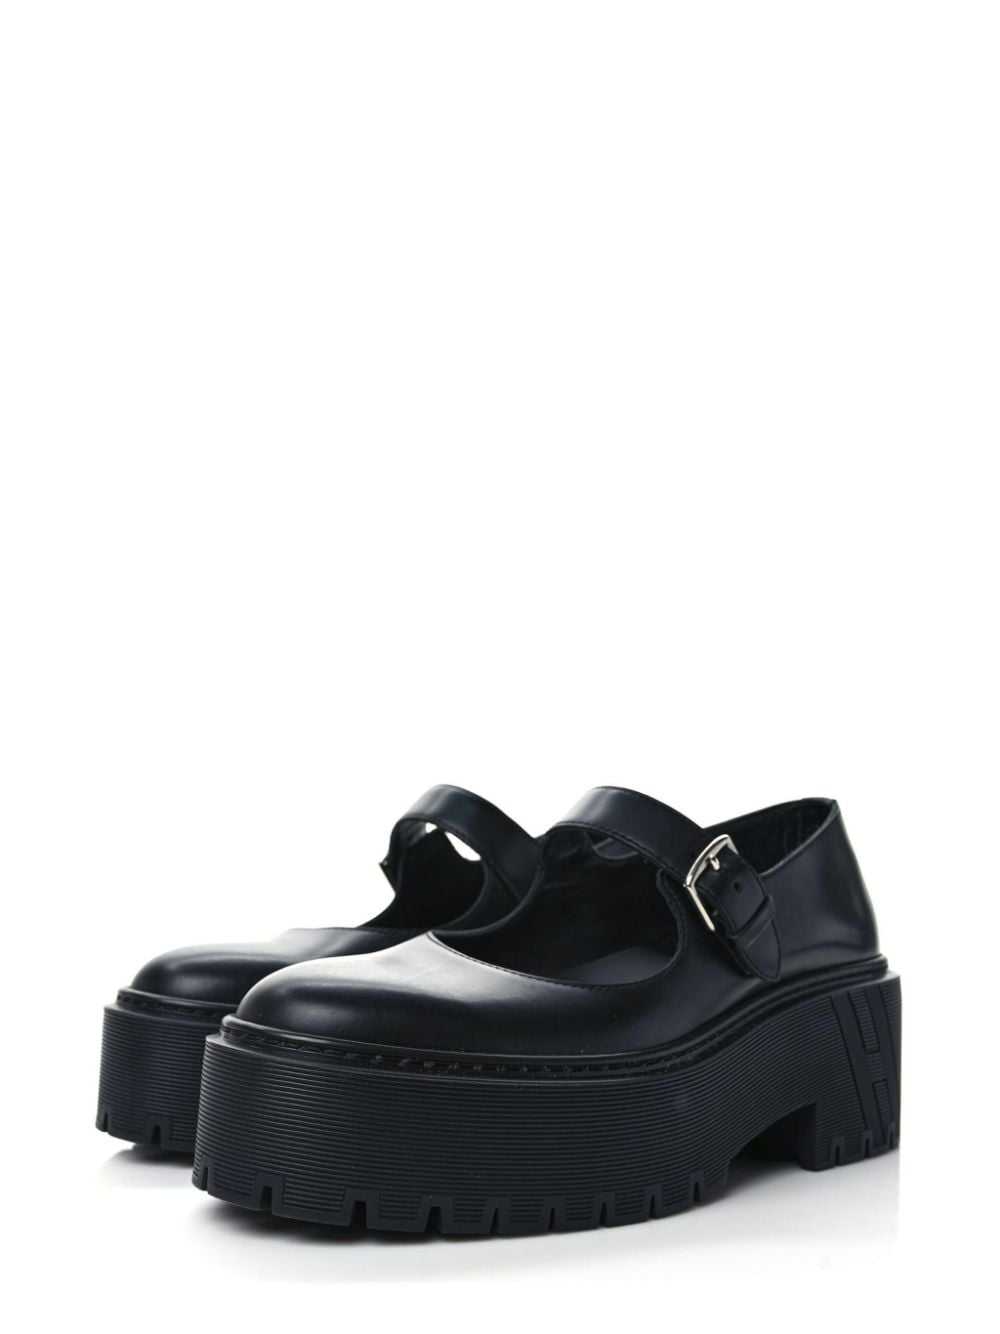 Hermès Pre-Owned Hoxton Oxford Mary Jane shoes - … - image 2